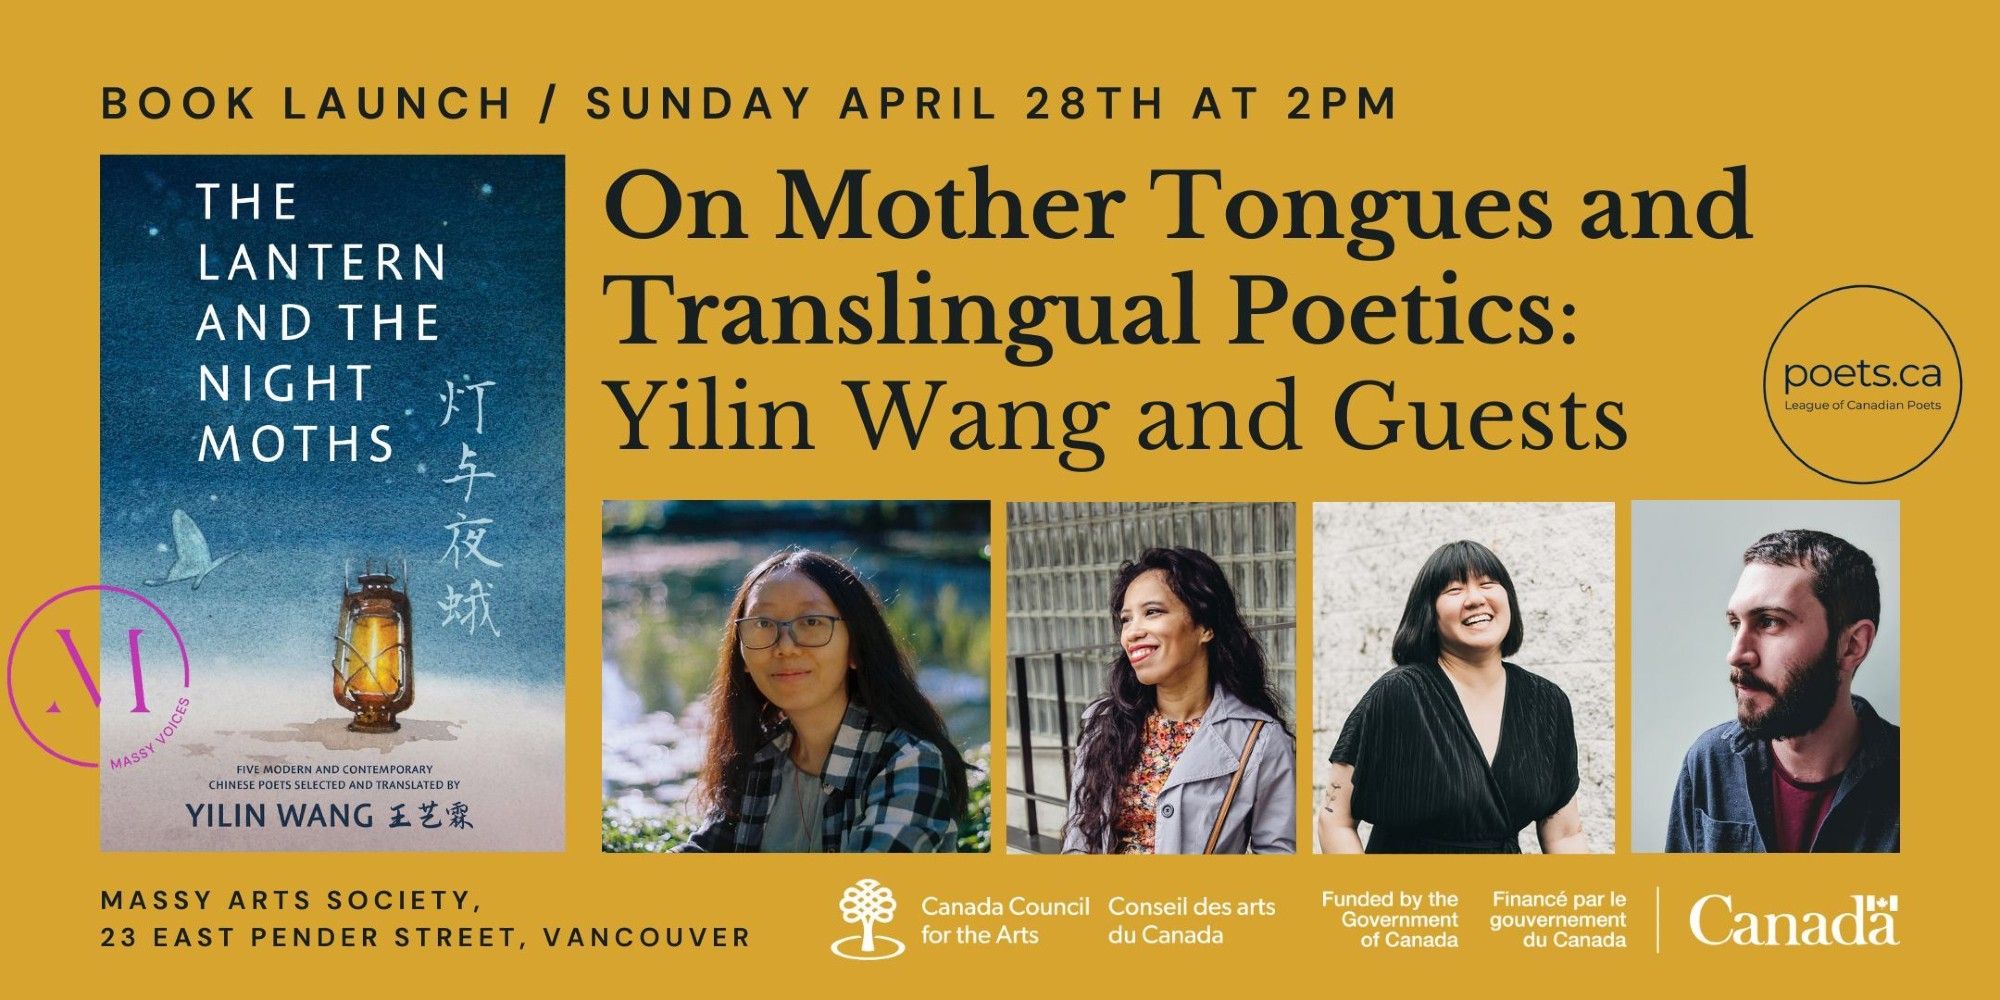 Book Launch / Sunday April 28th at 2pm
On Mother Tongues and Translingual Poetics:
Yilin Wang and Guests